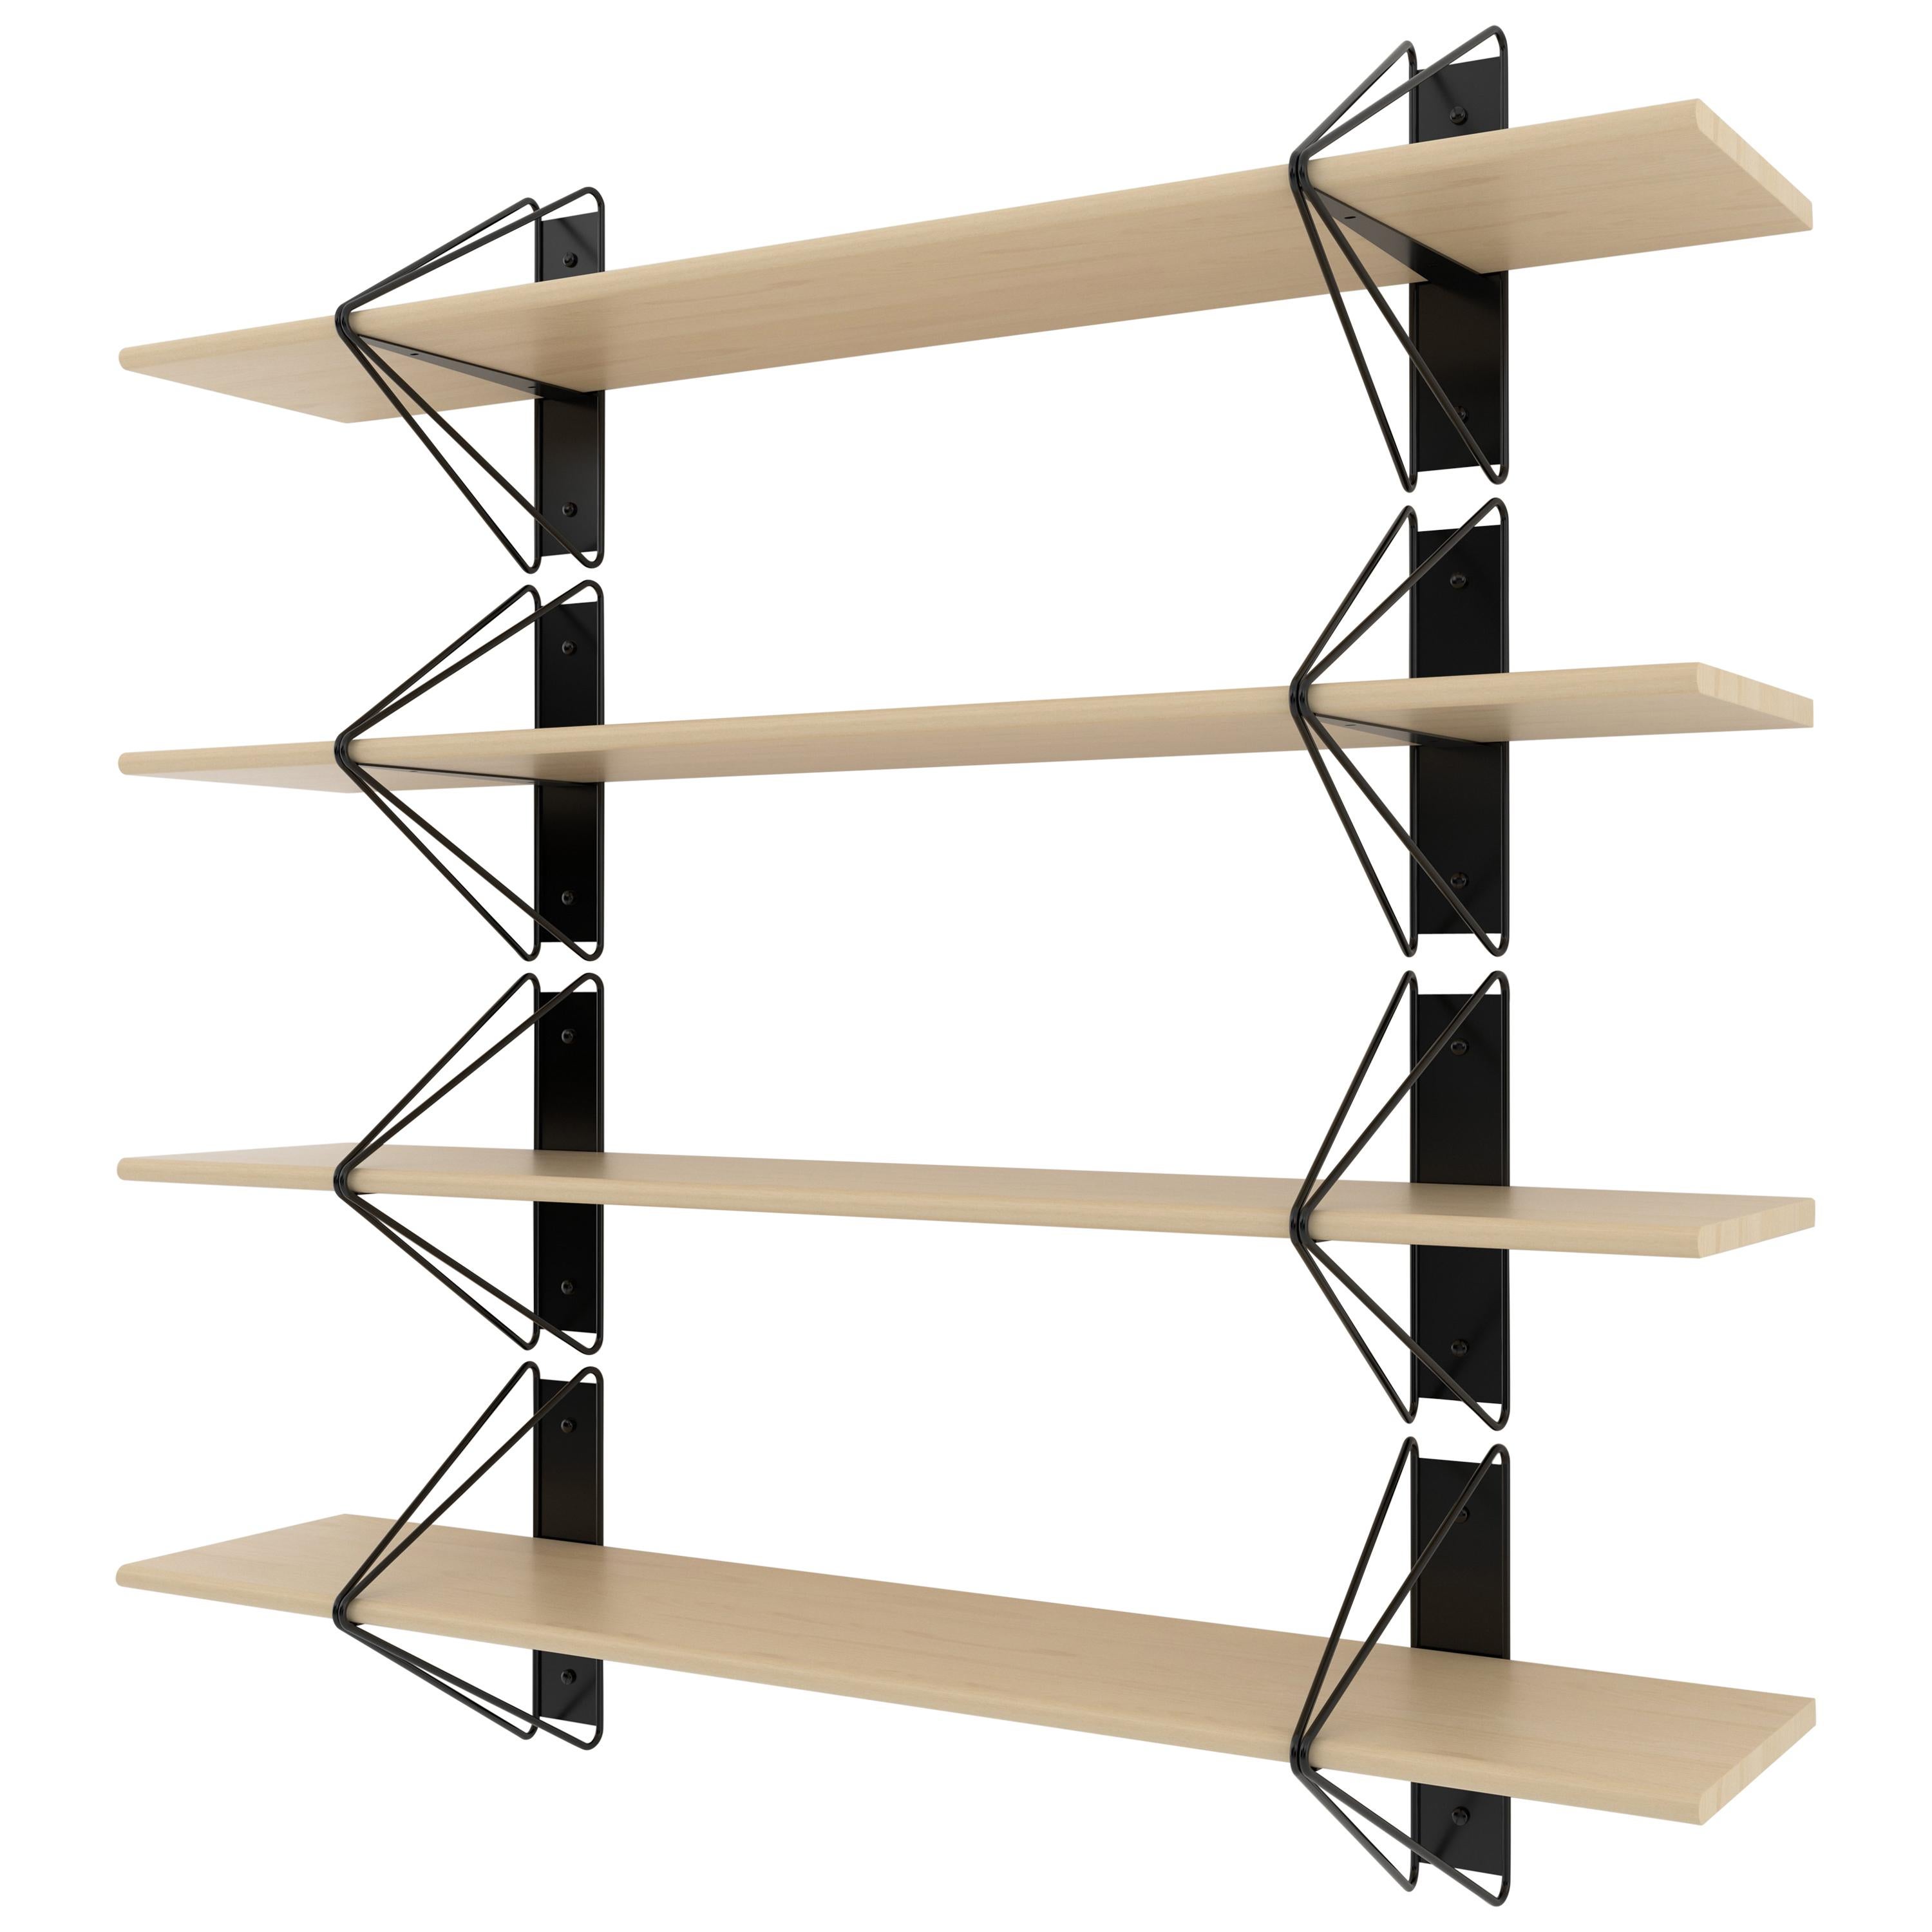 American Set of 5 Strut Shelves from Souda, Black and Walnut, Made to Order For Sale